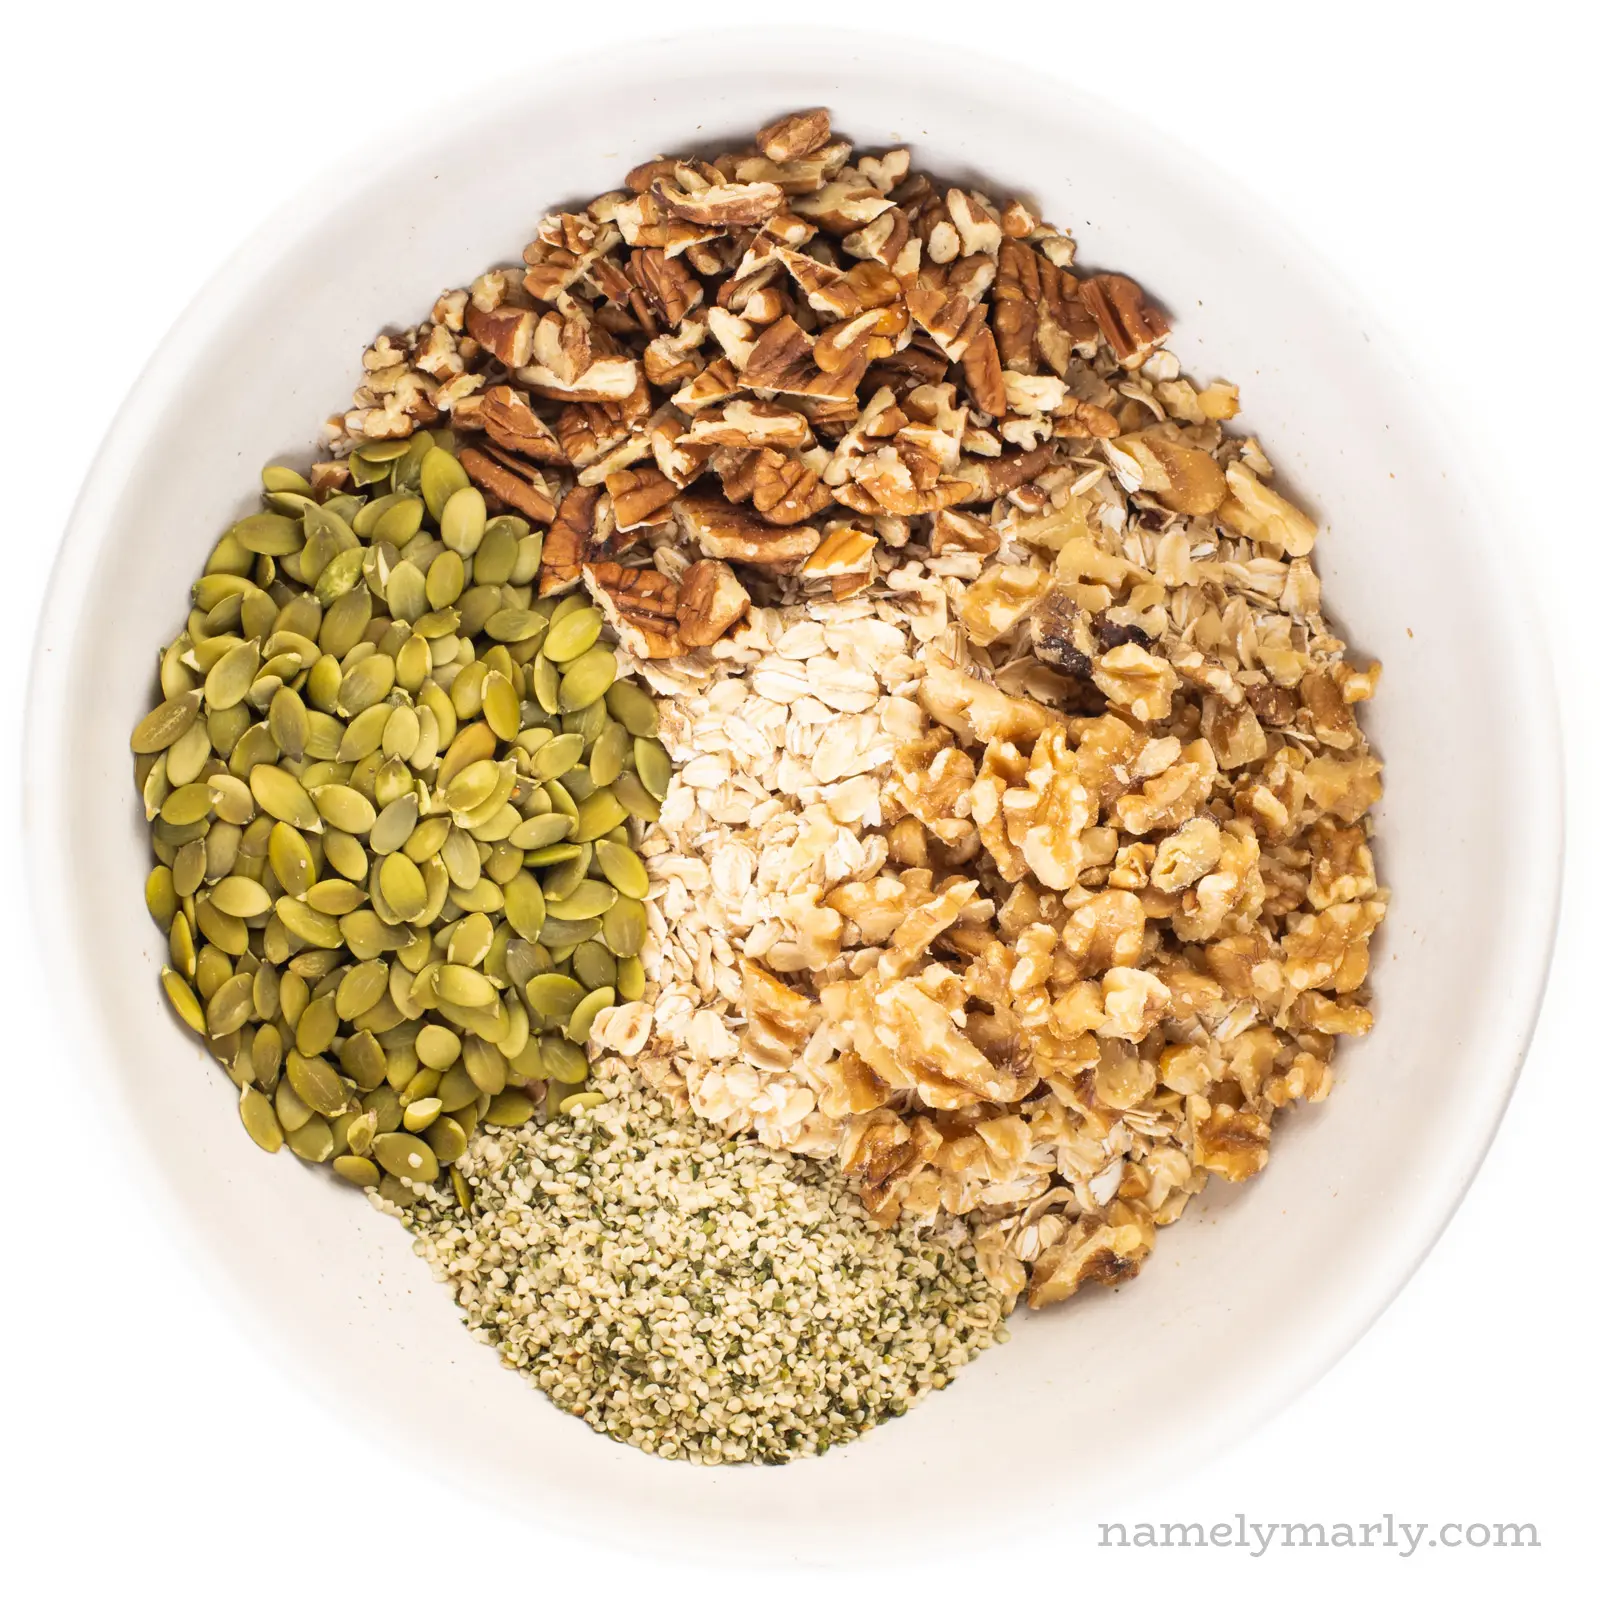 A large white bowl holds oats, nuts, and seeds for granola.